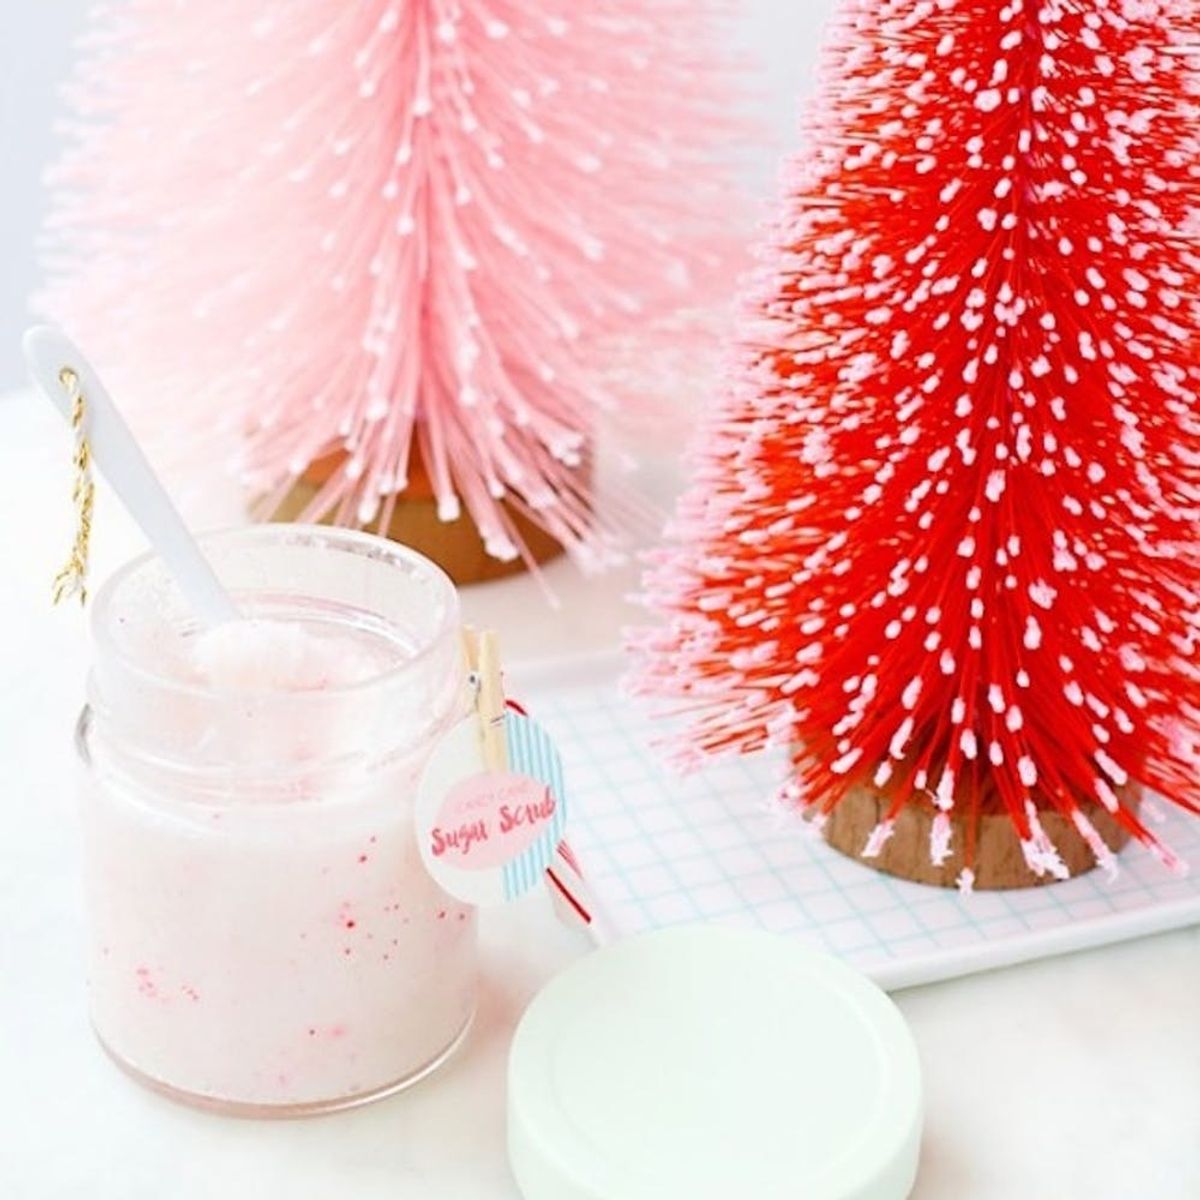 19 DIY Stocking Stuffers That Everyone Will *Actually* Want